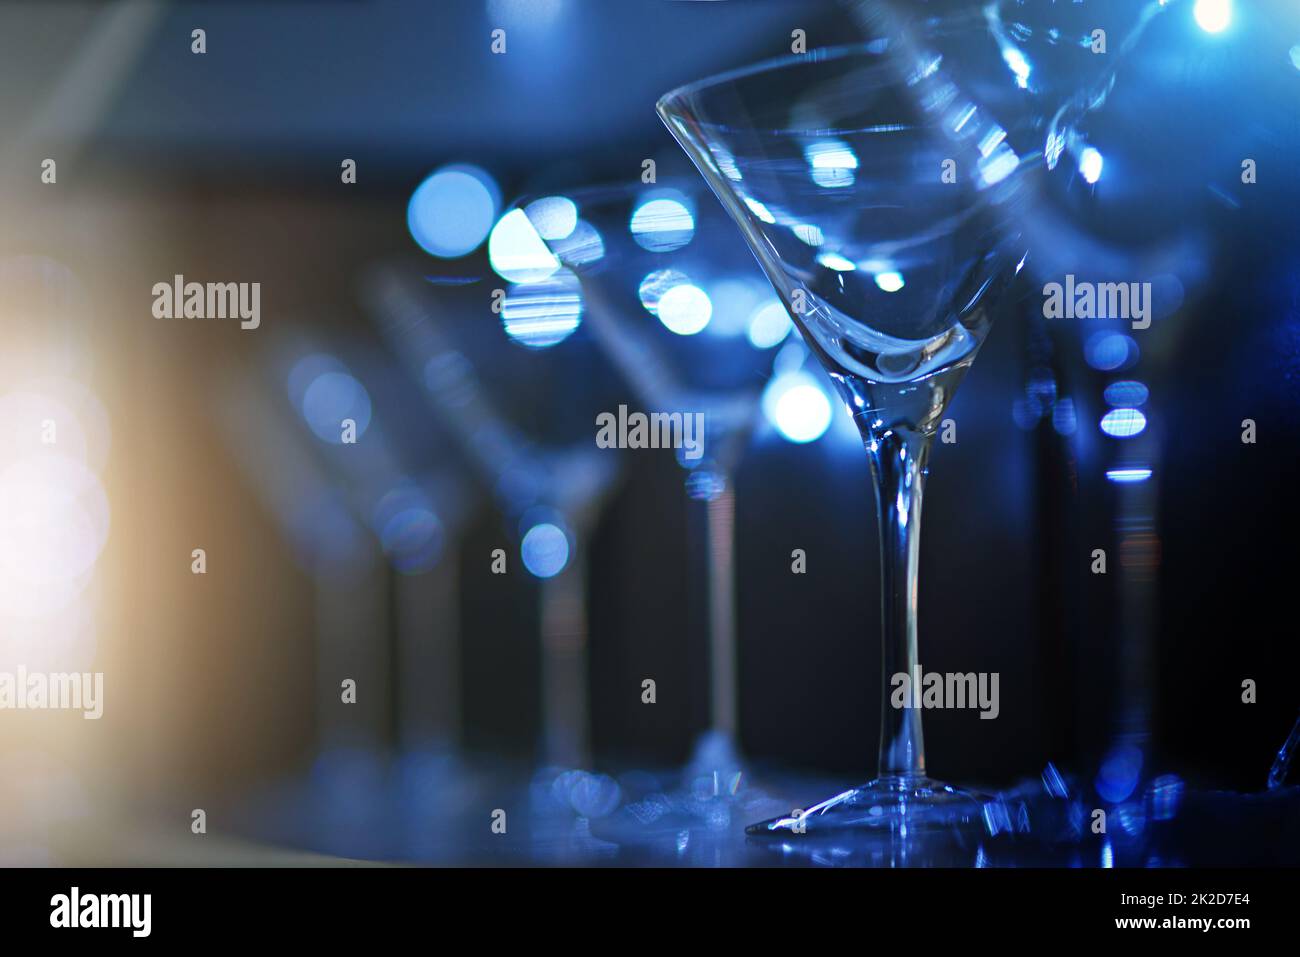 Whats your drink of choice. Shot of empty cocktail glasses on a countertop in a nightclub. Stock Photo